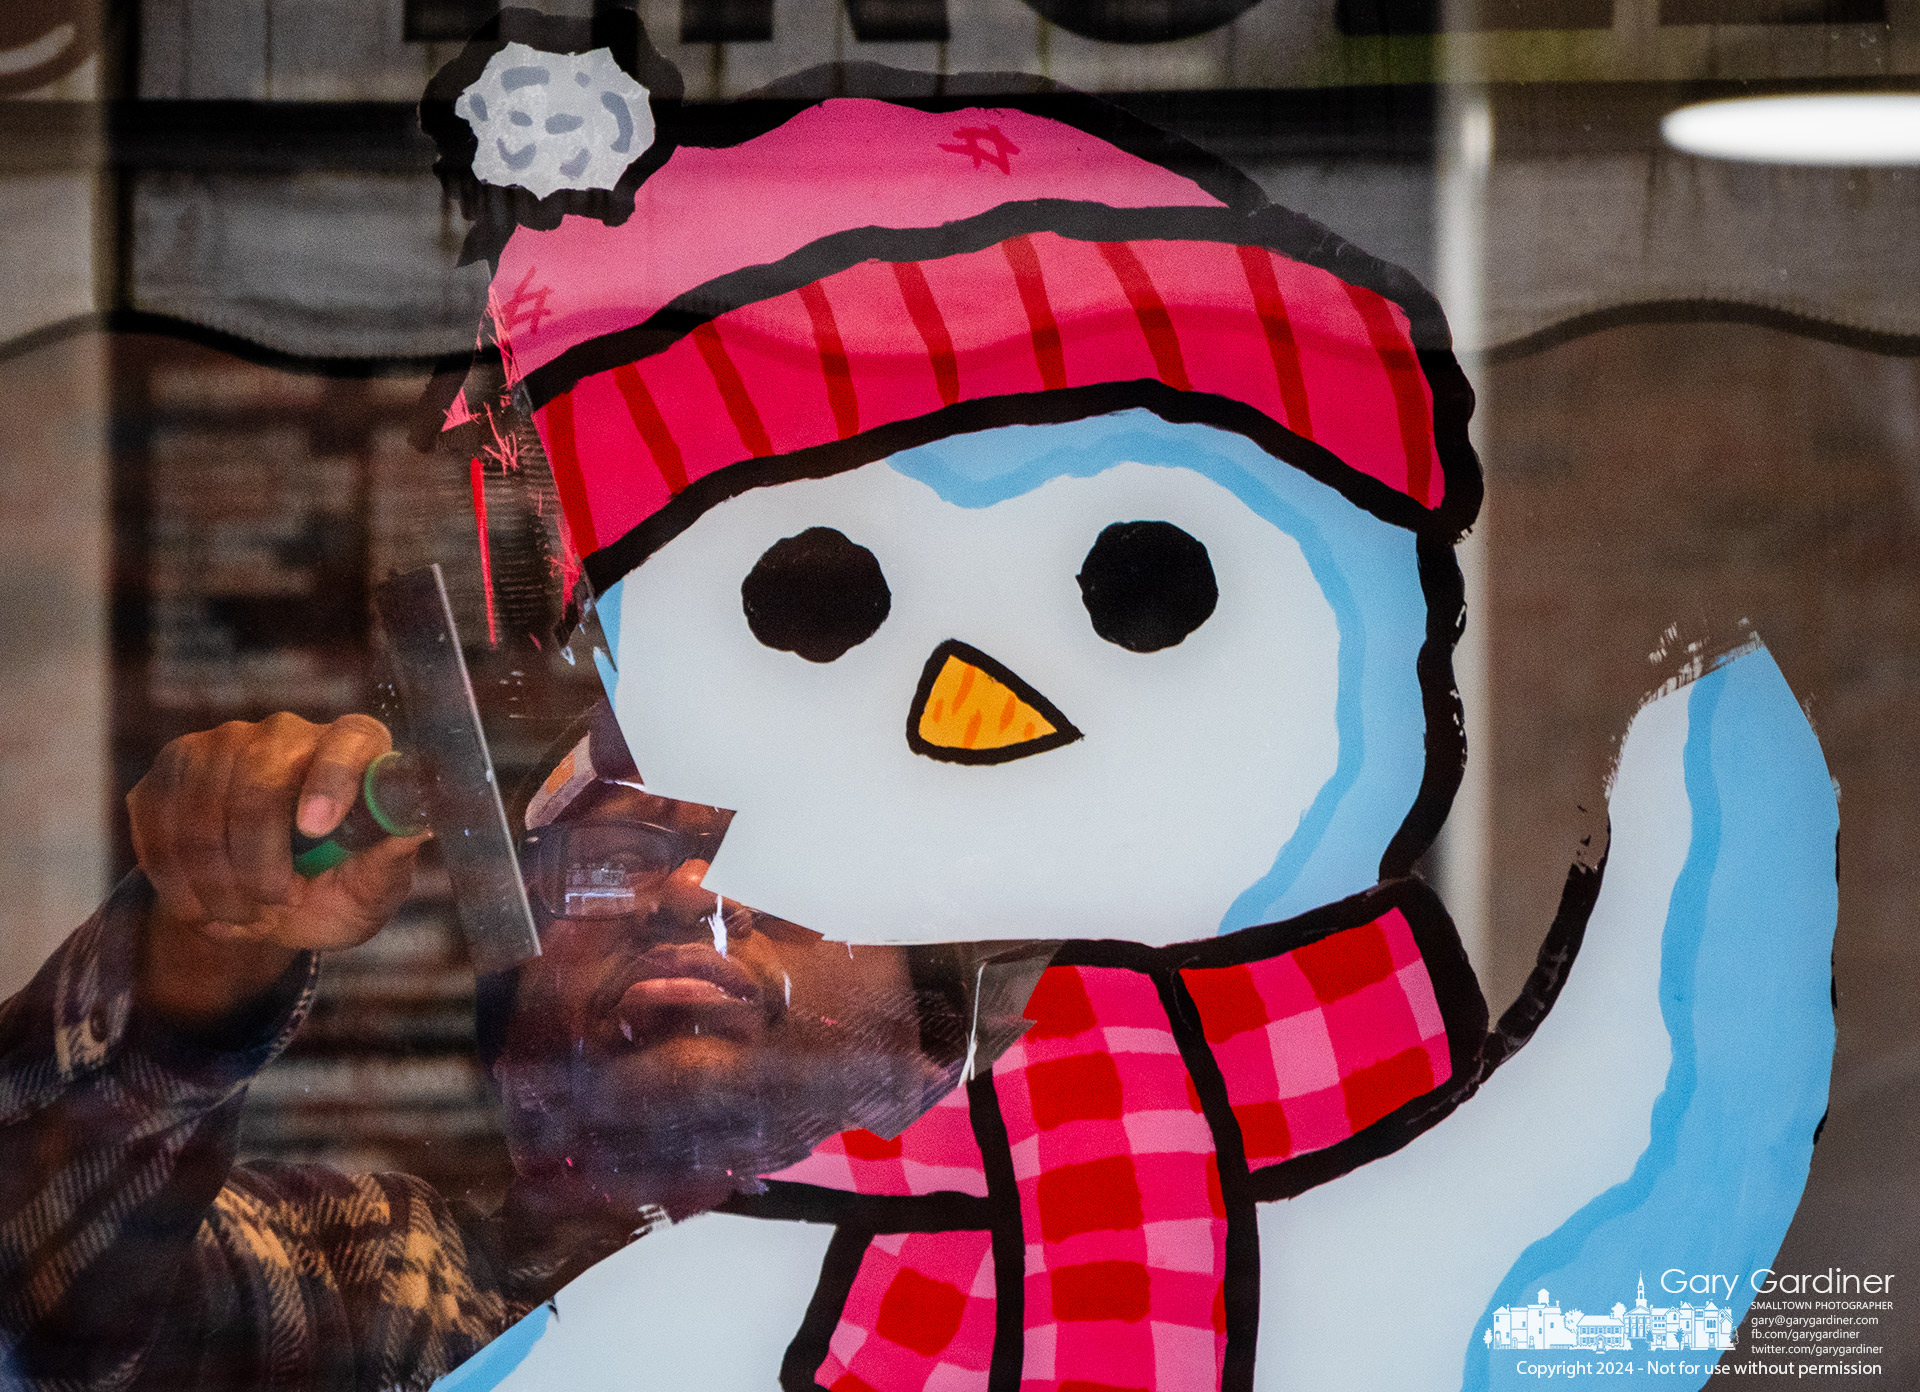 The snowman painted in the widow of Whit's in Uptown Westerville appears to be giving a farewell wave as he is scraped from the front window clearing the storefront of all signs of Christmas and winter as it prepares to offer Valentine's Day specials. My Final Photo for January 23, 2024.